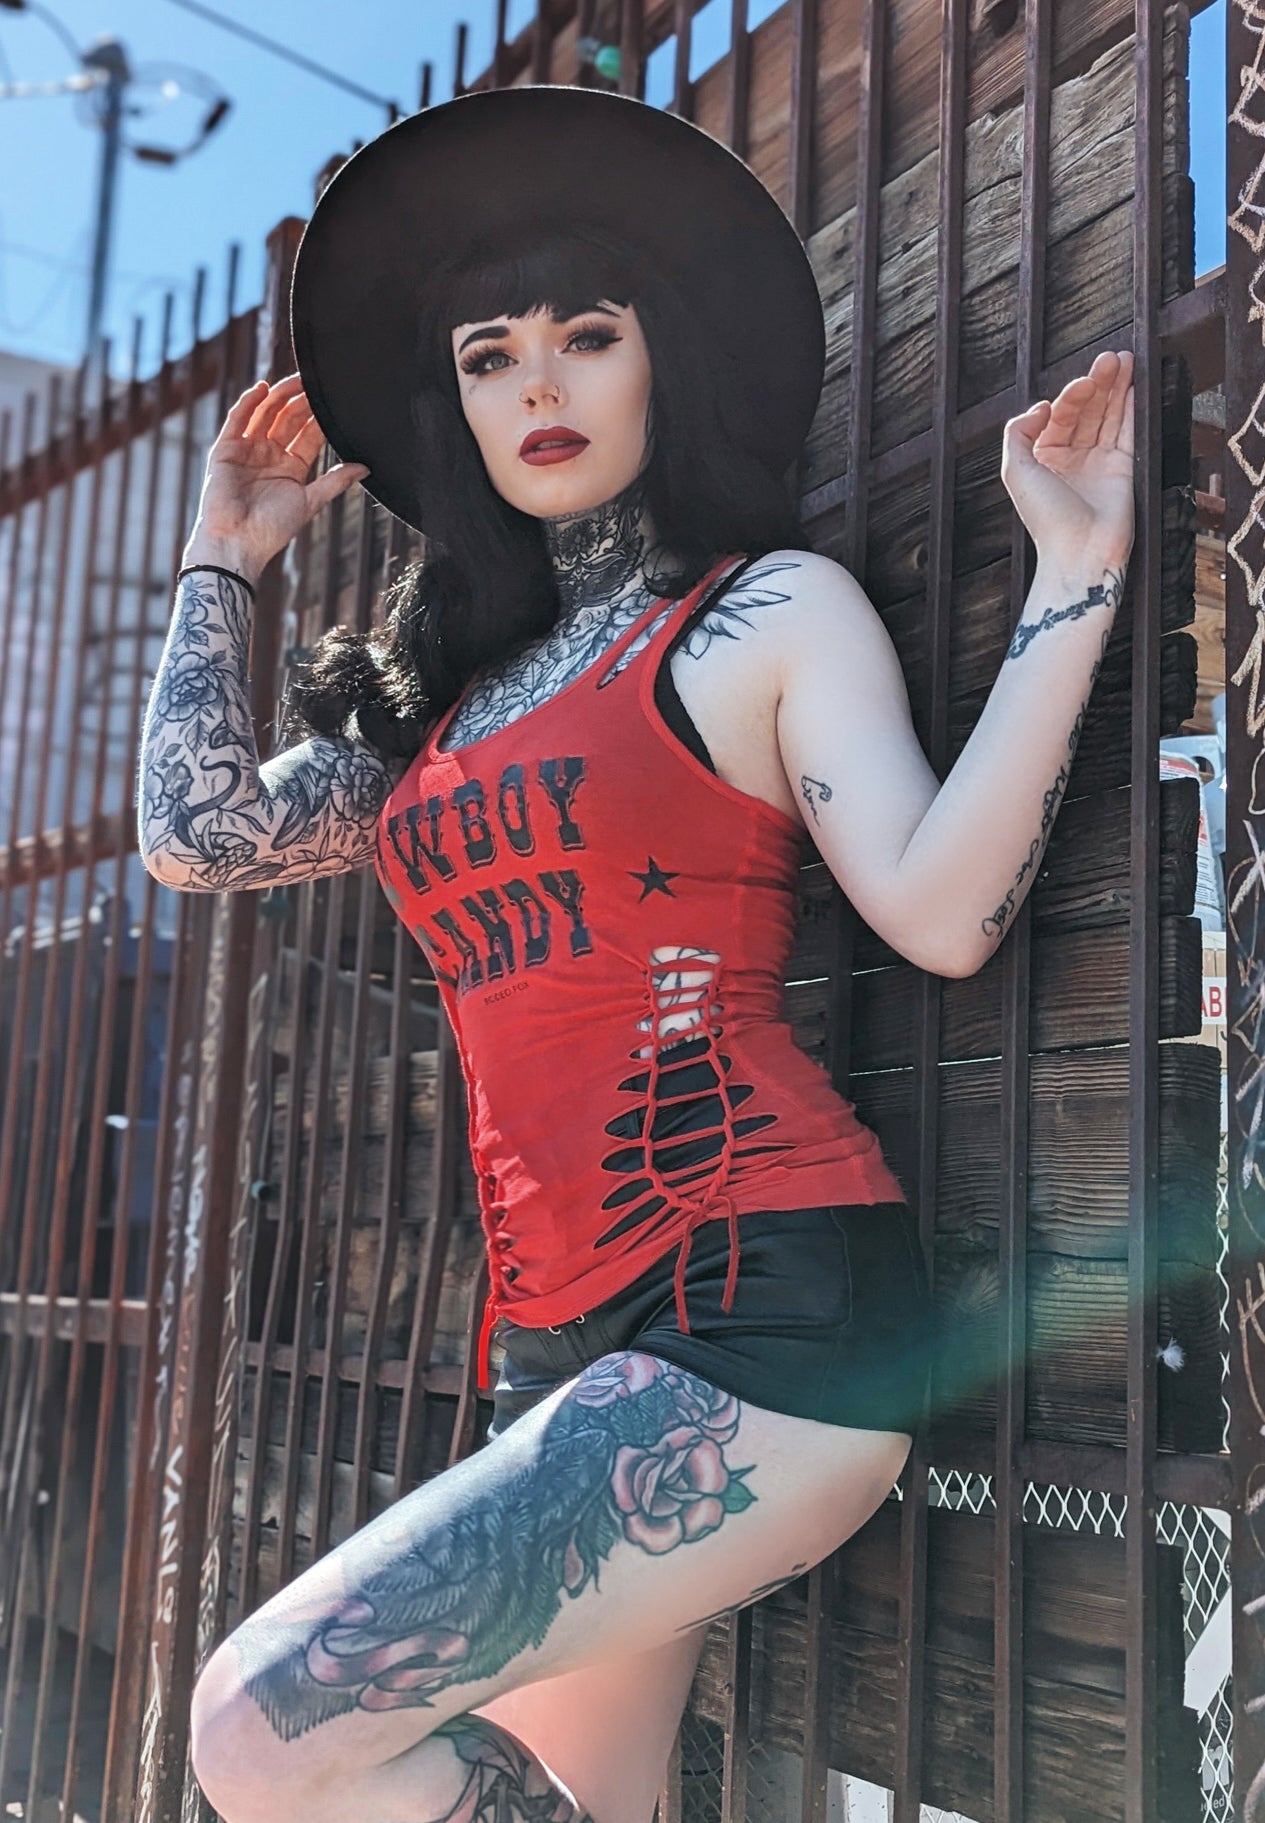 Cowboy Candy Racerback Slashed Tank Top- Red